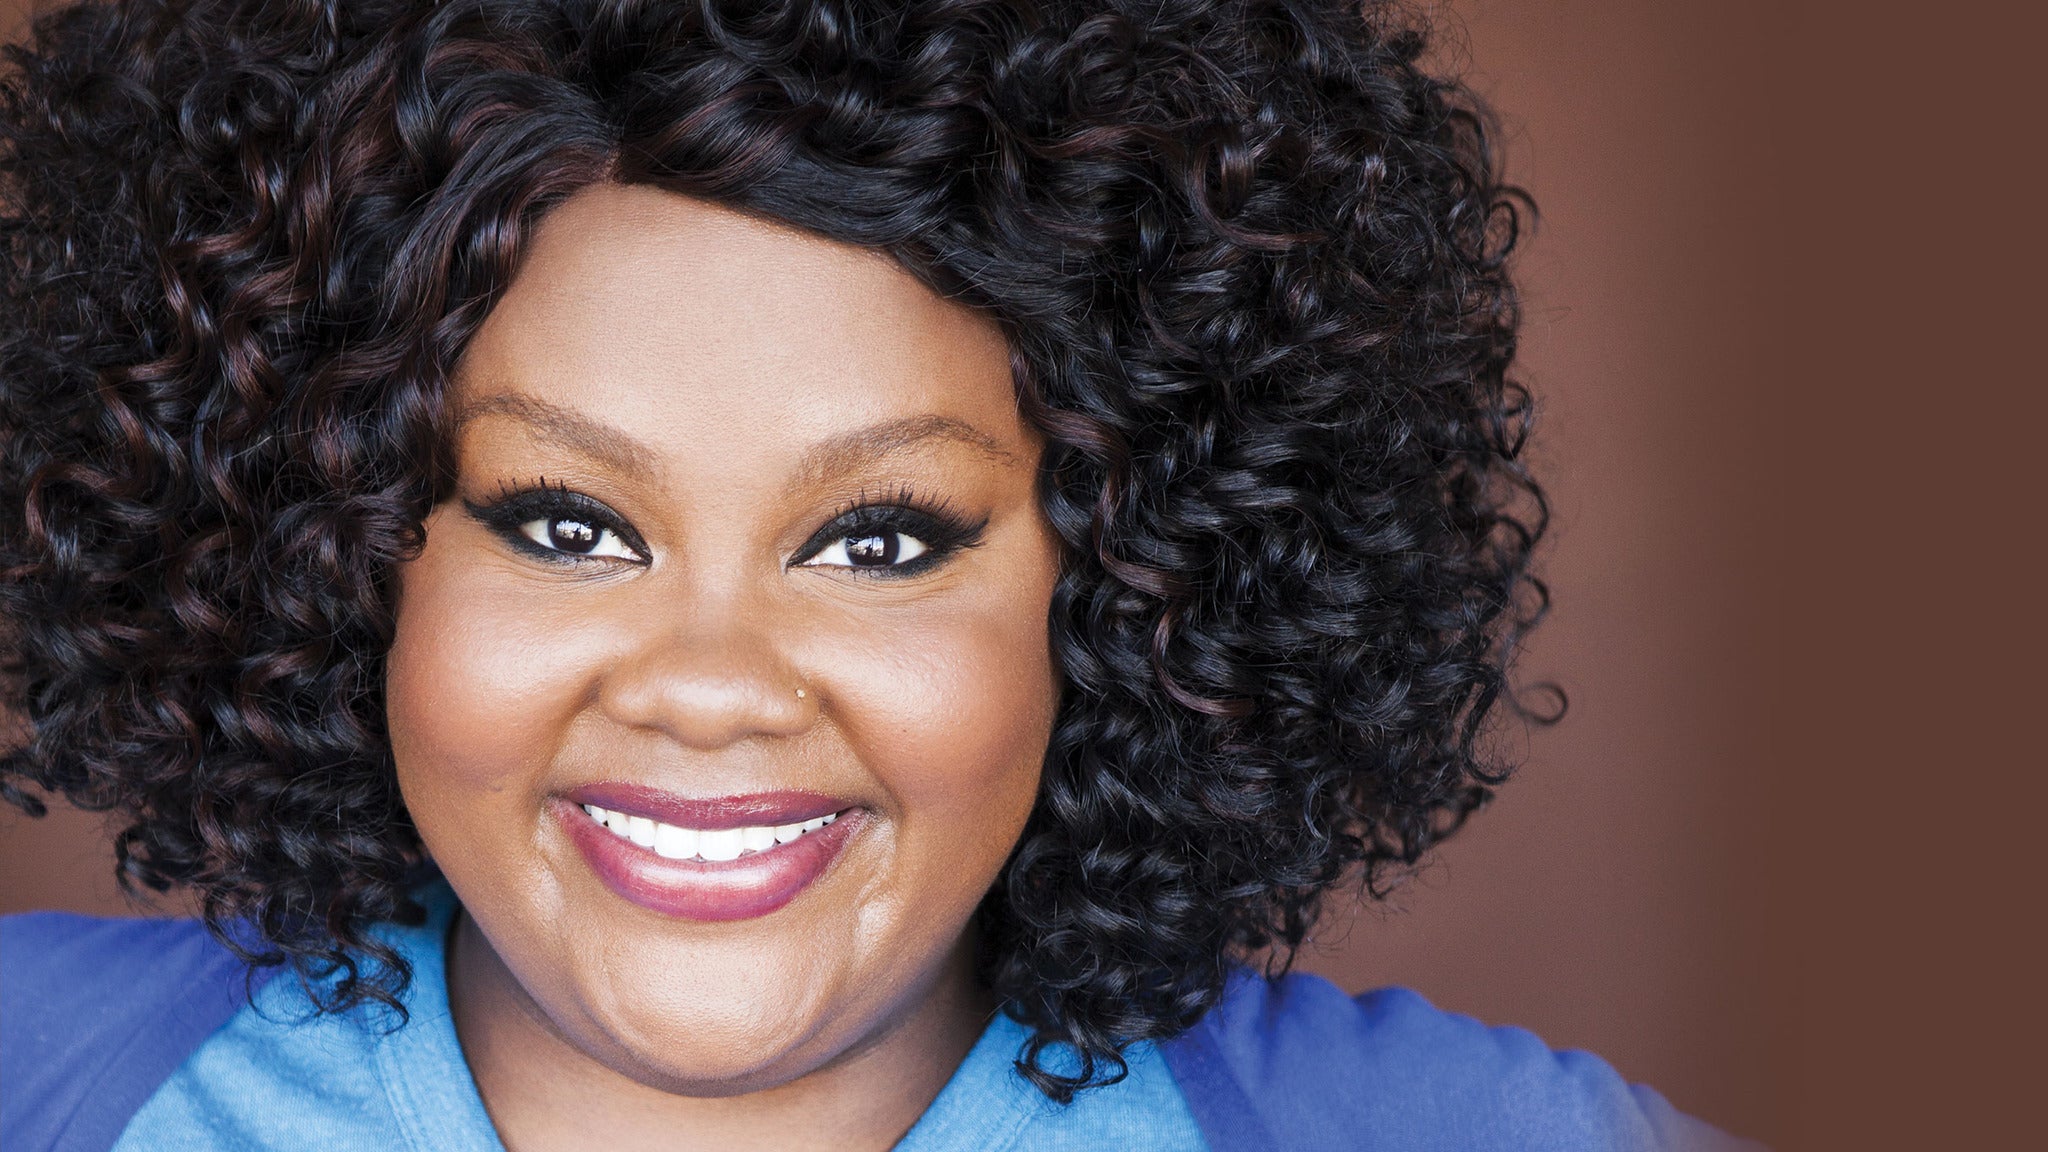 Nicole Byer - THOT: The Happiest Out There presale password for early tickets in San Francisco